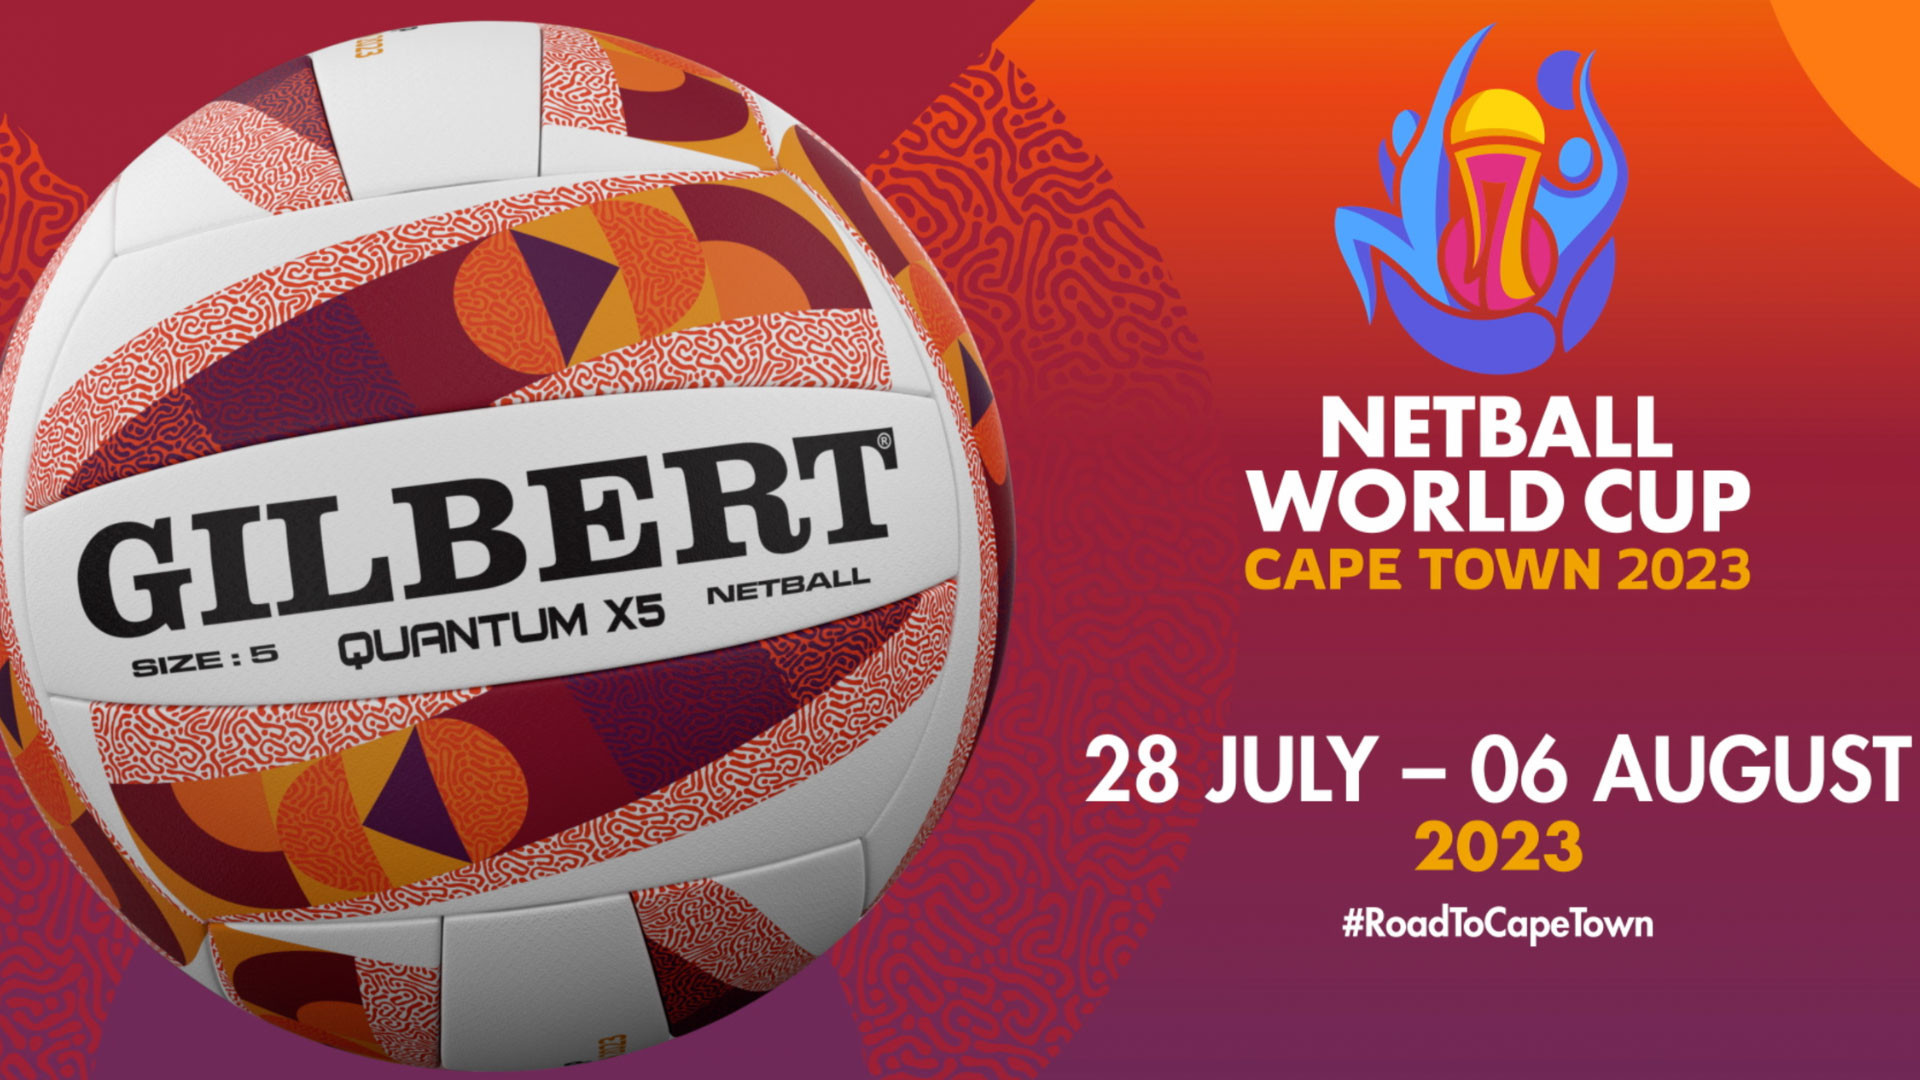 Netball World Cup hold celebrations with 100 days to go until tournament 